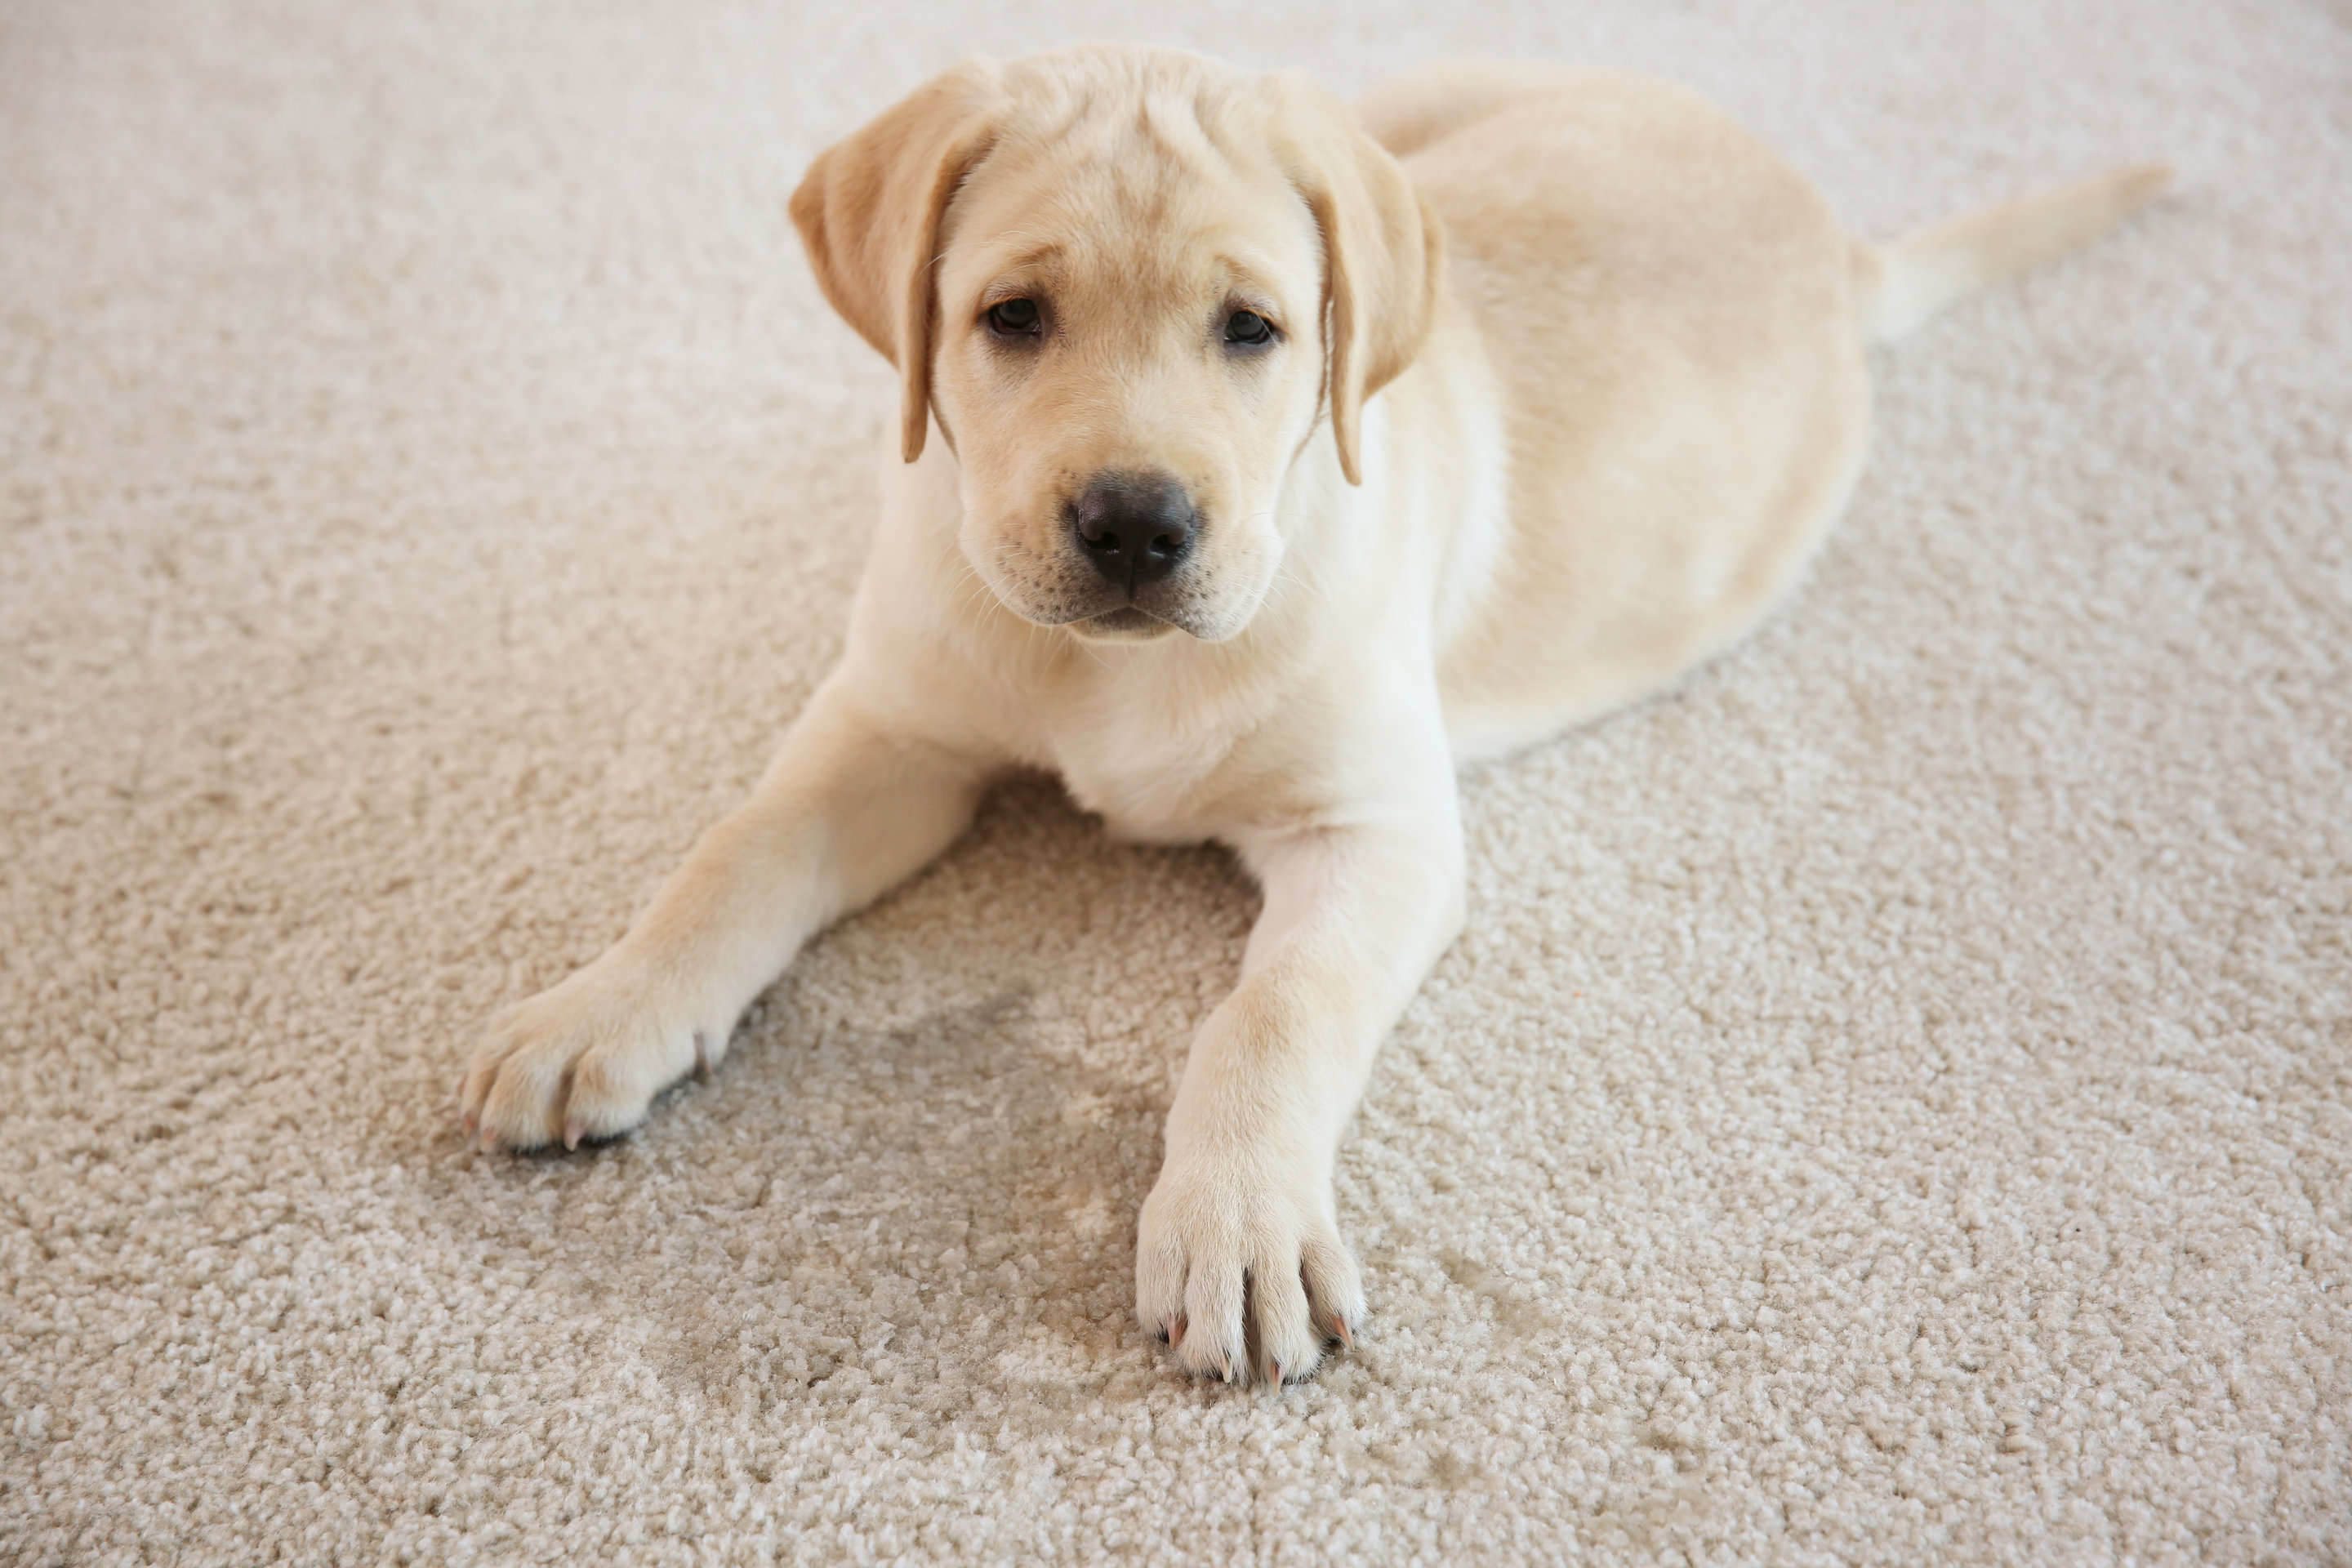 Eliminate pet stains and odors